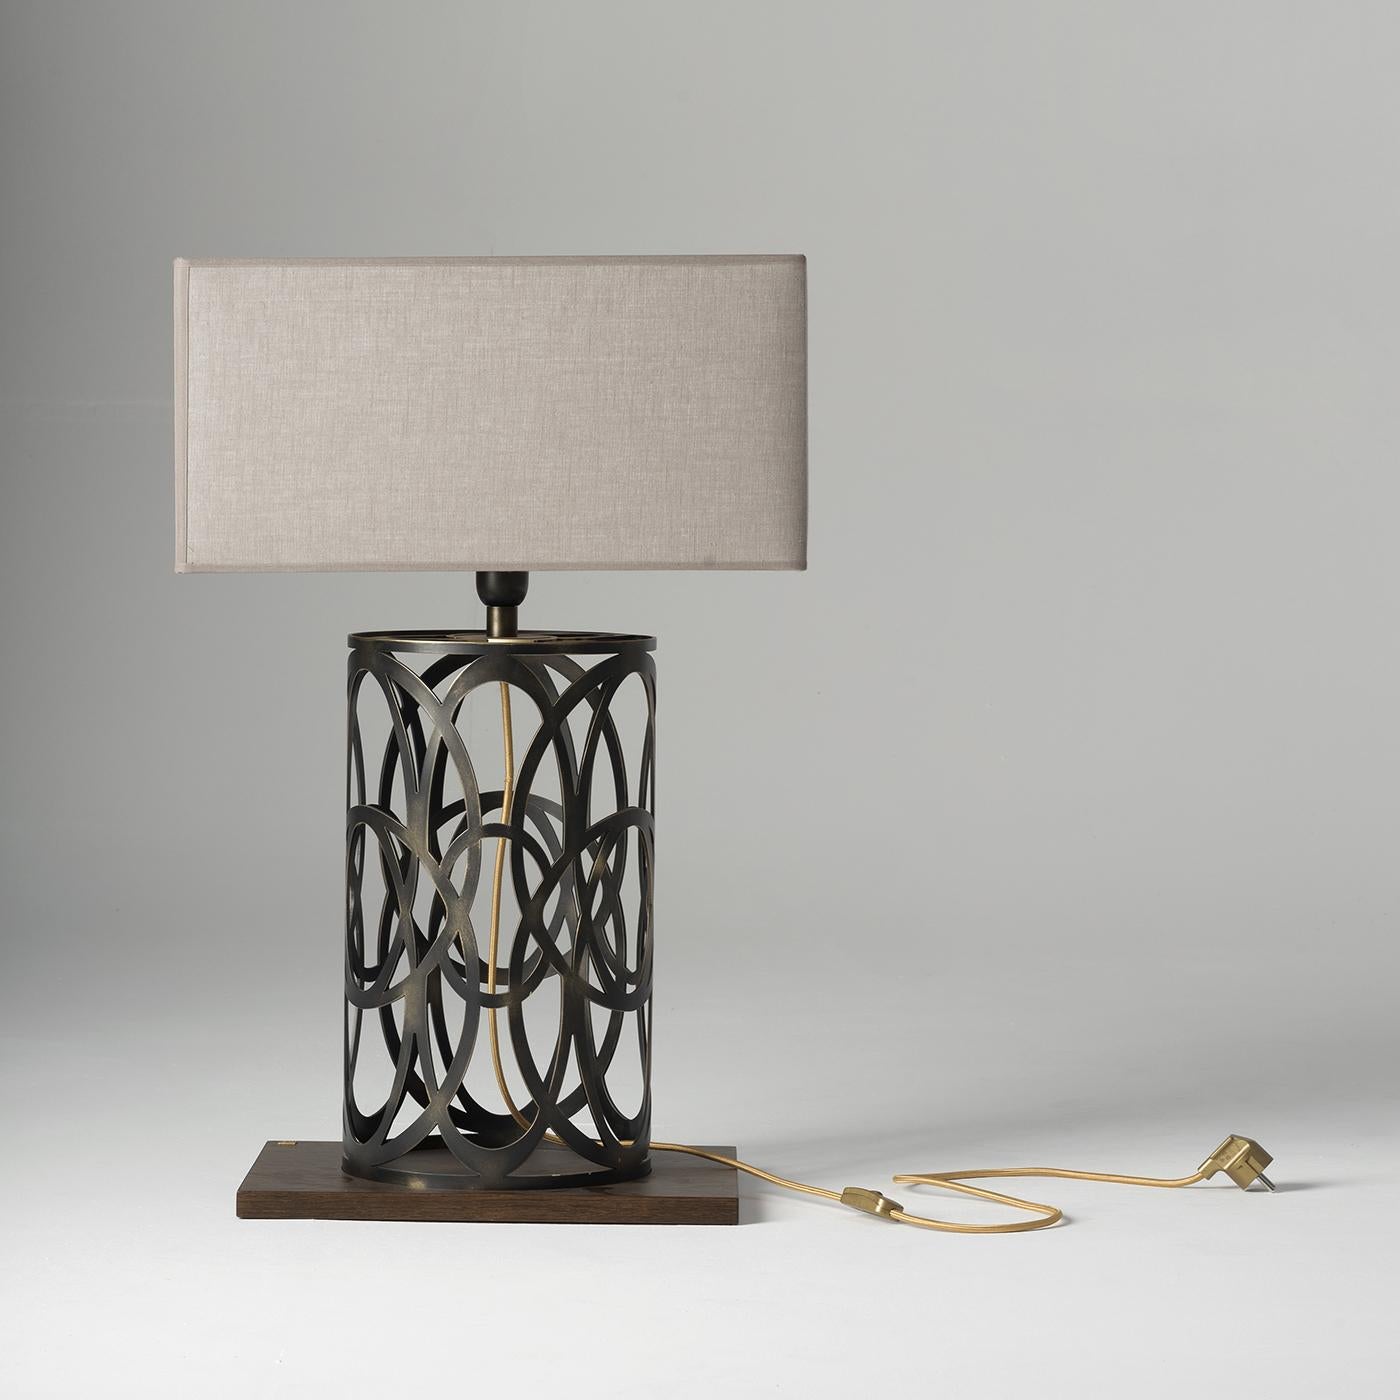 The Violante table lamp is defined by a geometric base, boasting an intricate cage-like structure crafted from acid-etched brass. Finished with a wooden support and a refined fabric shade, this lamp makes a stylish addition to any table, cabinet or